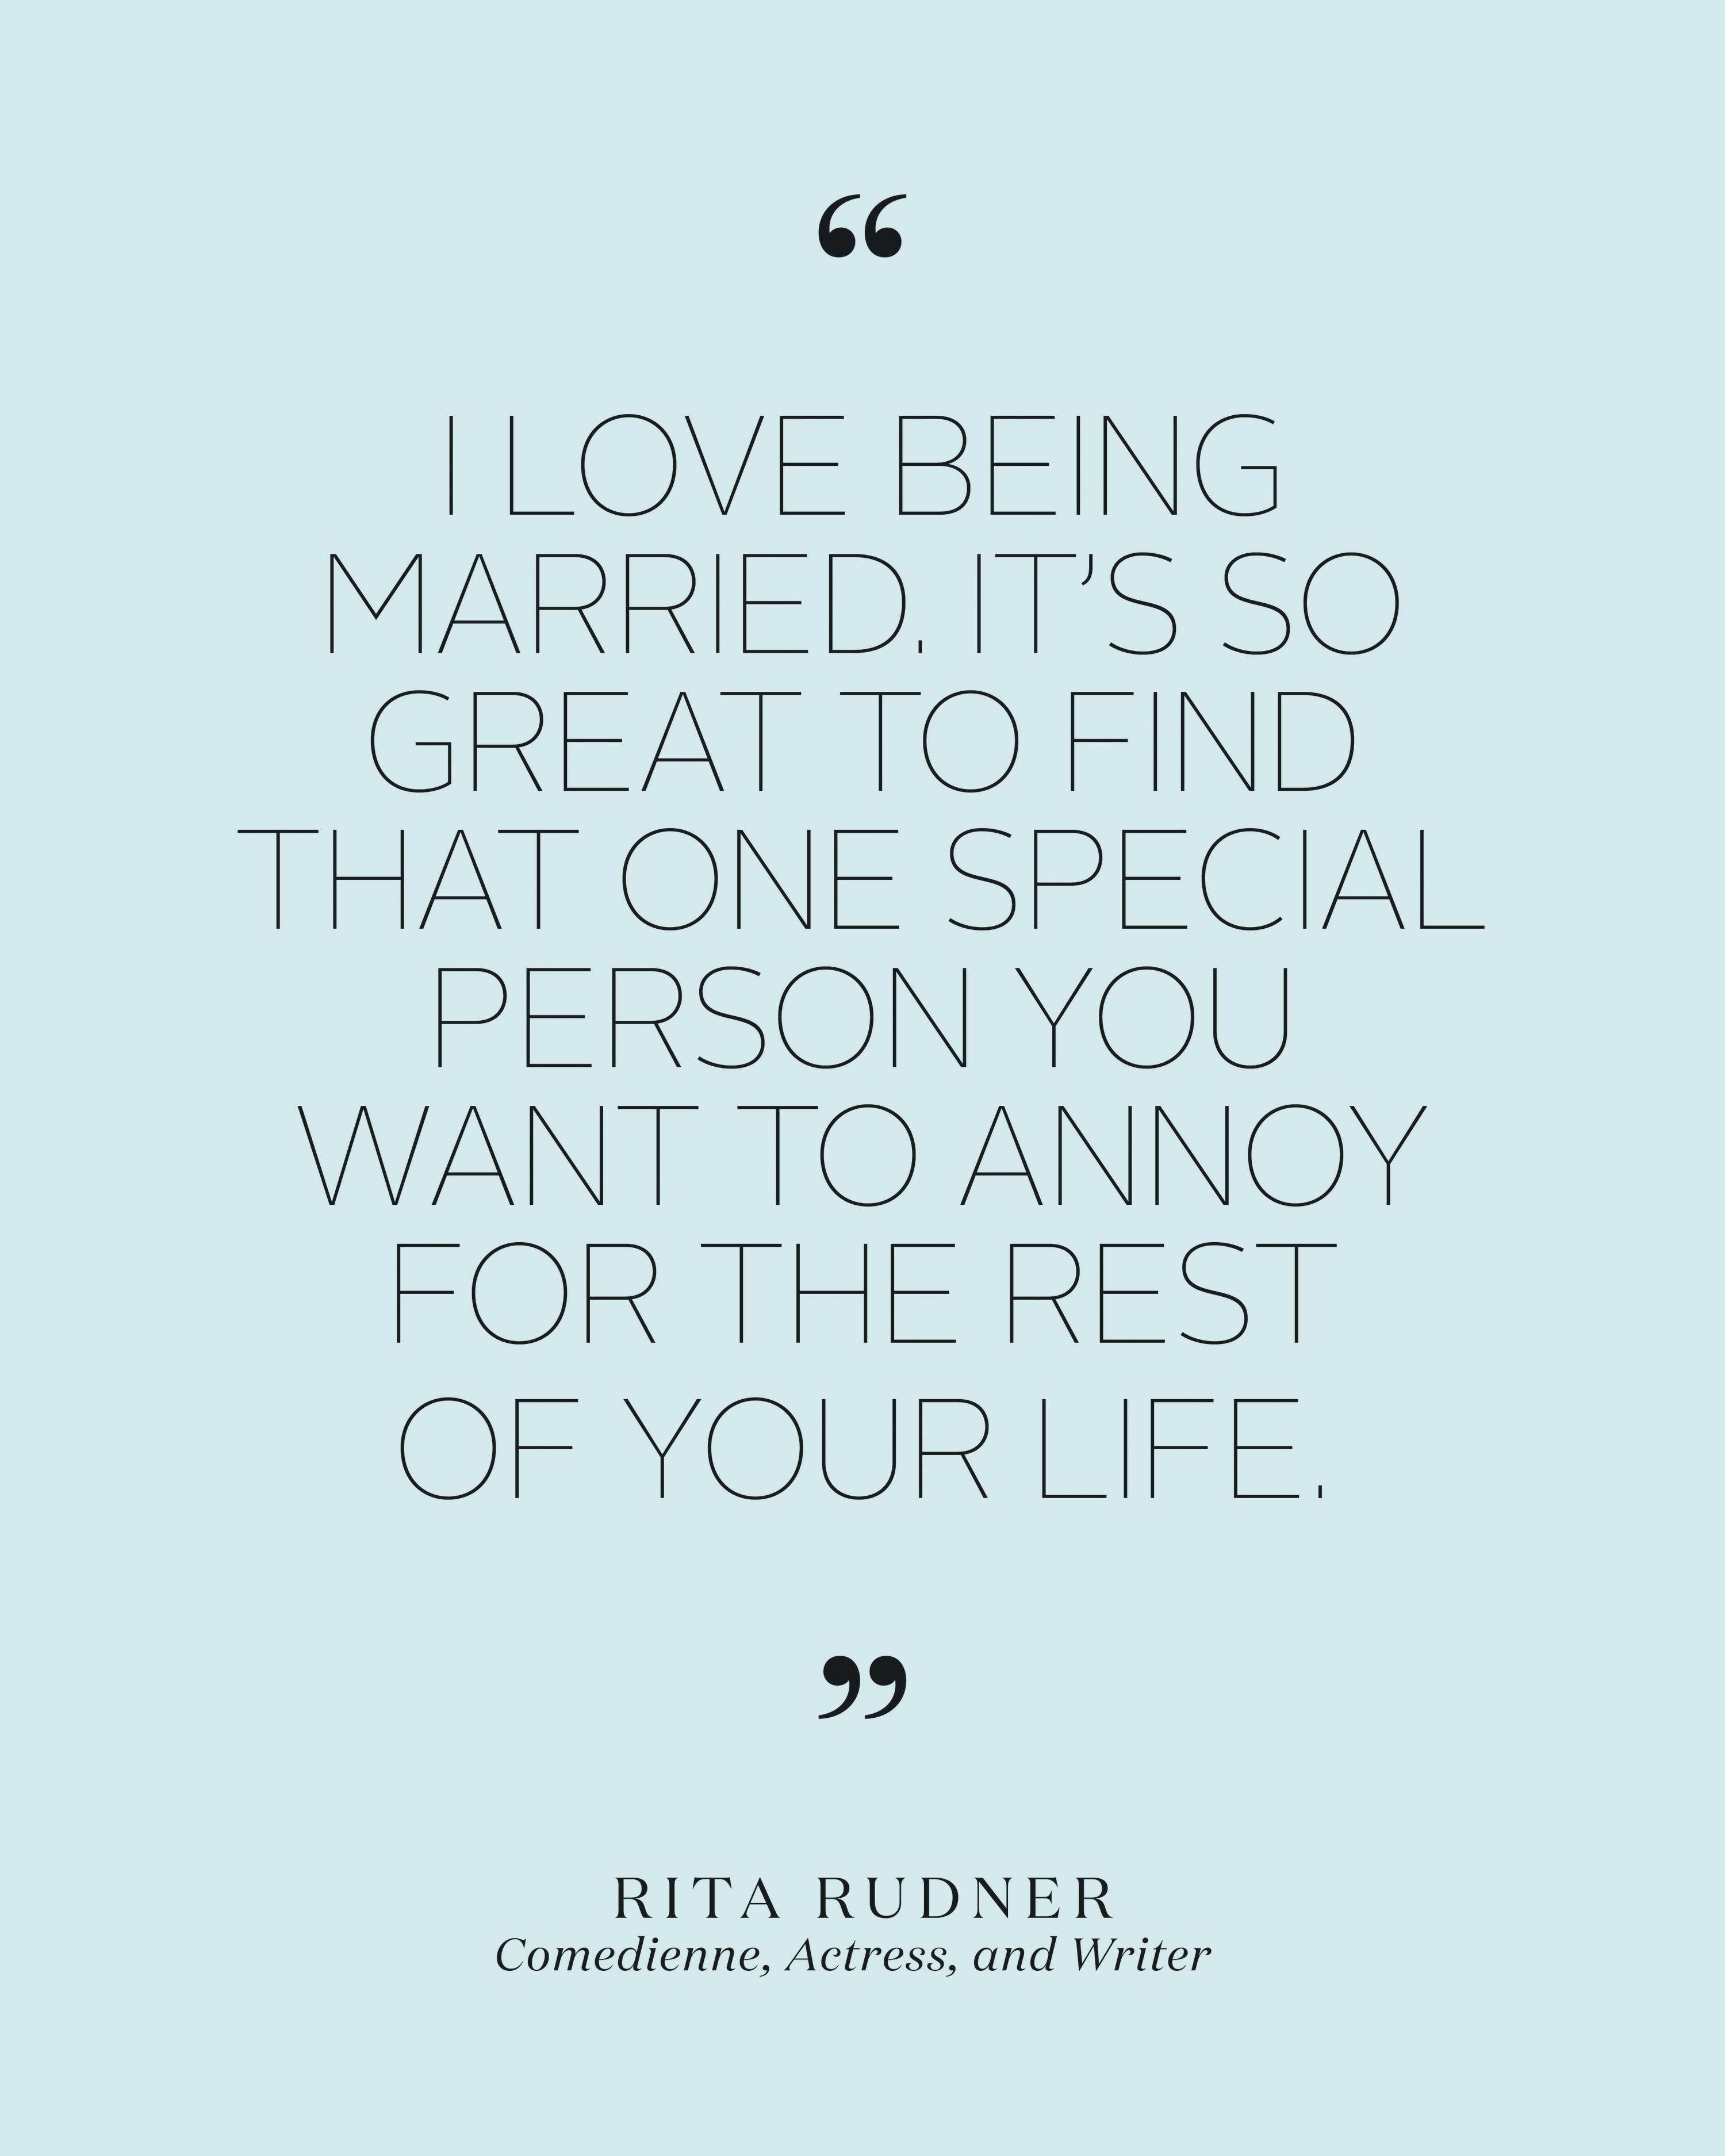 Bridal Shower Quotes To Set The Mood At The Pre Wedding Bash.